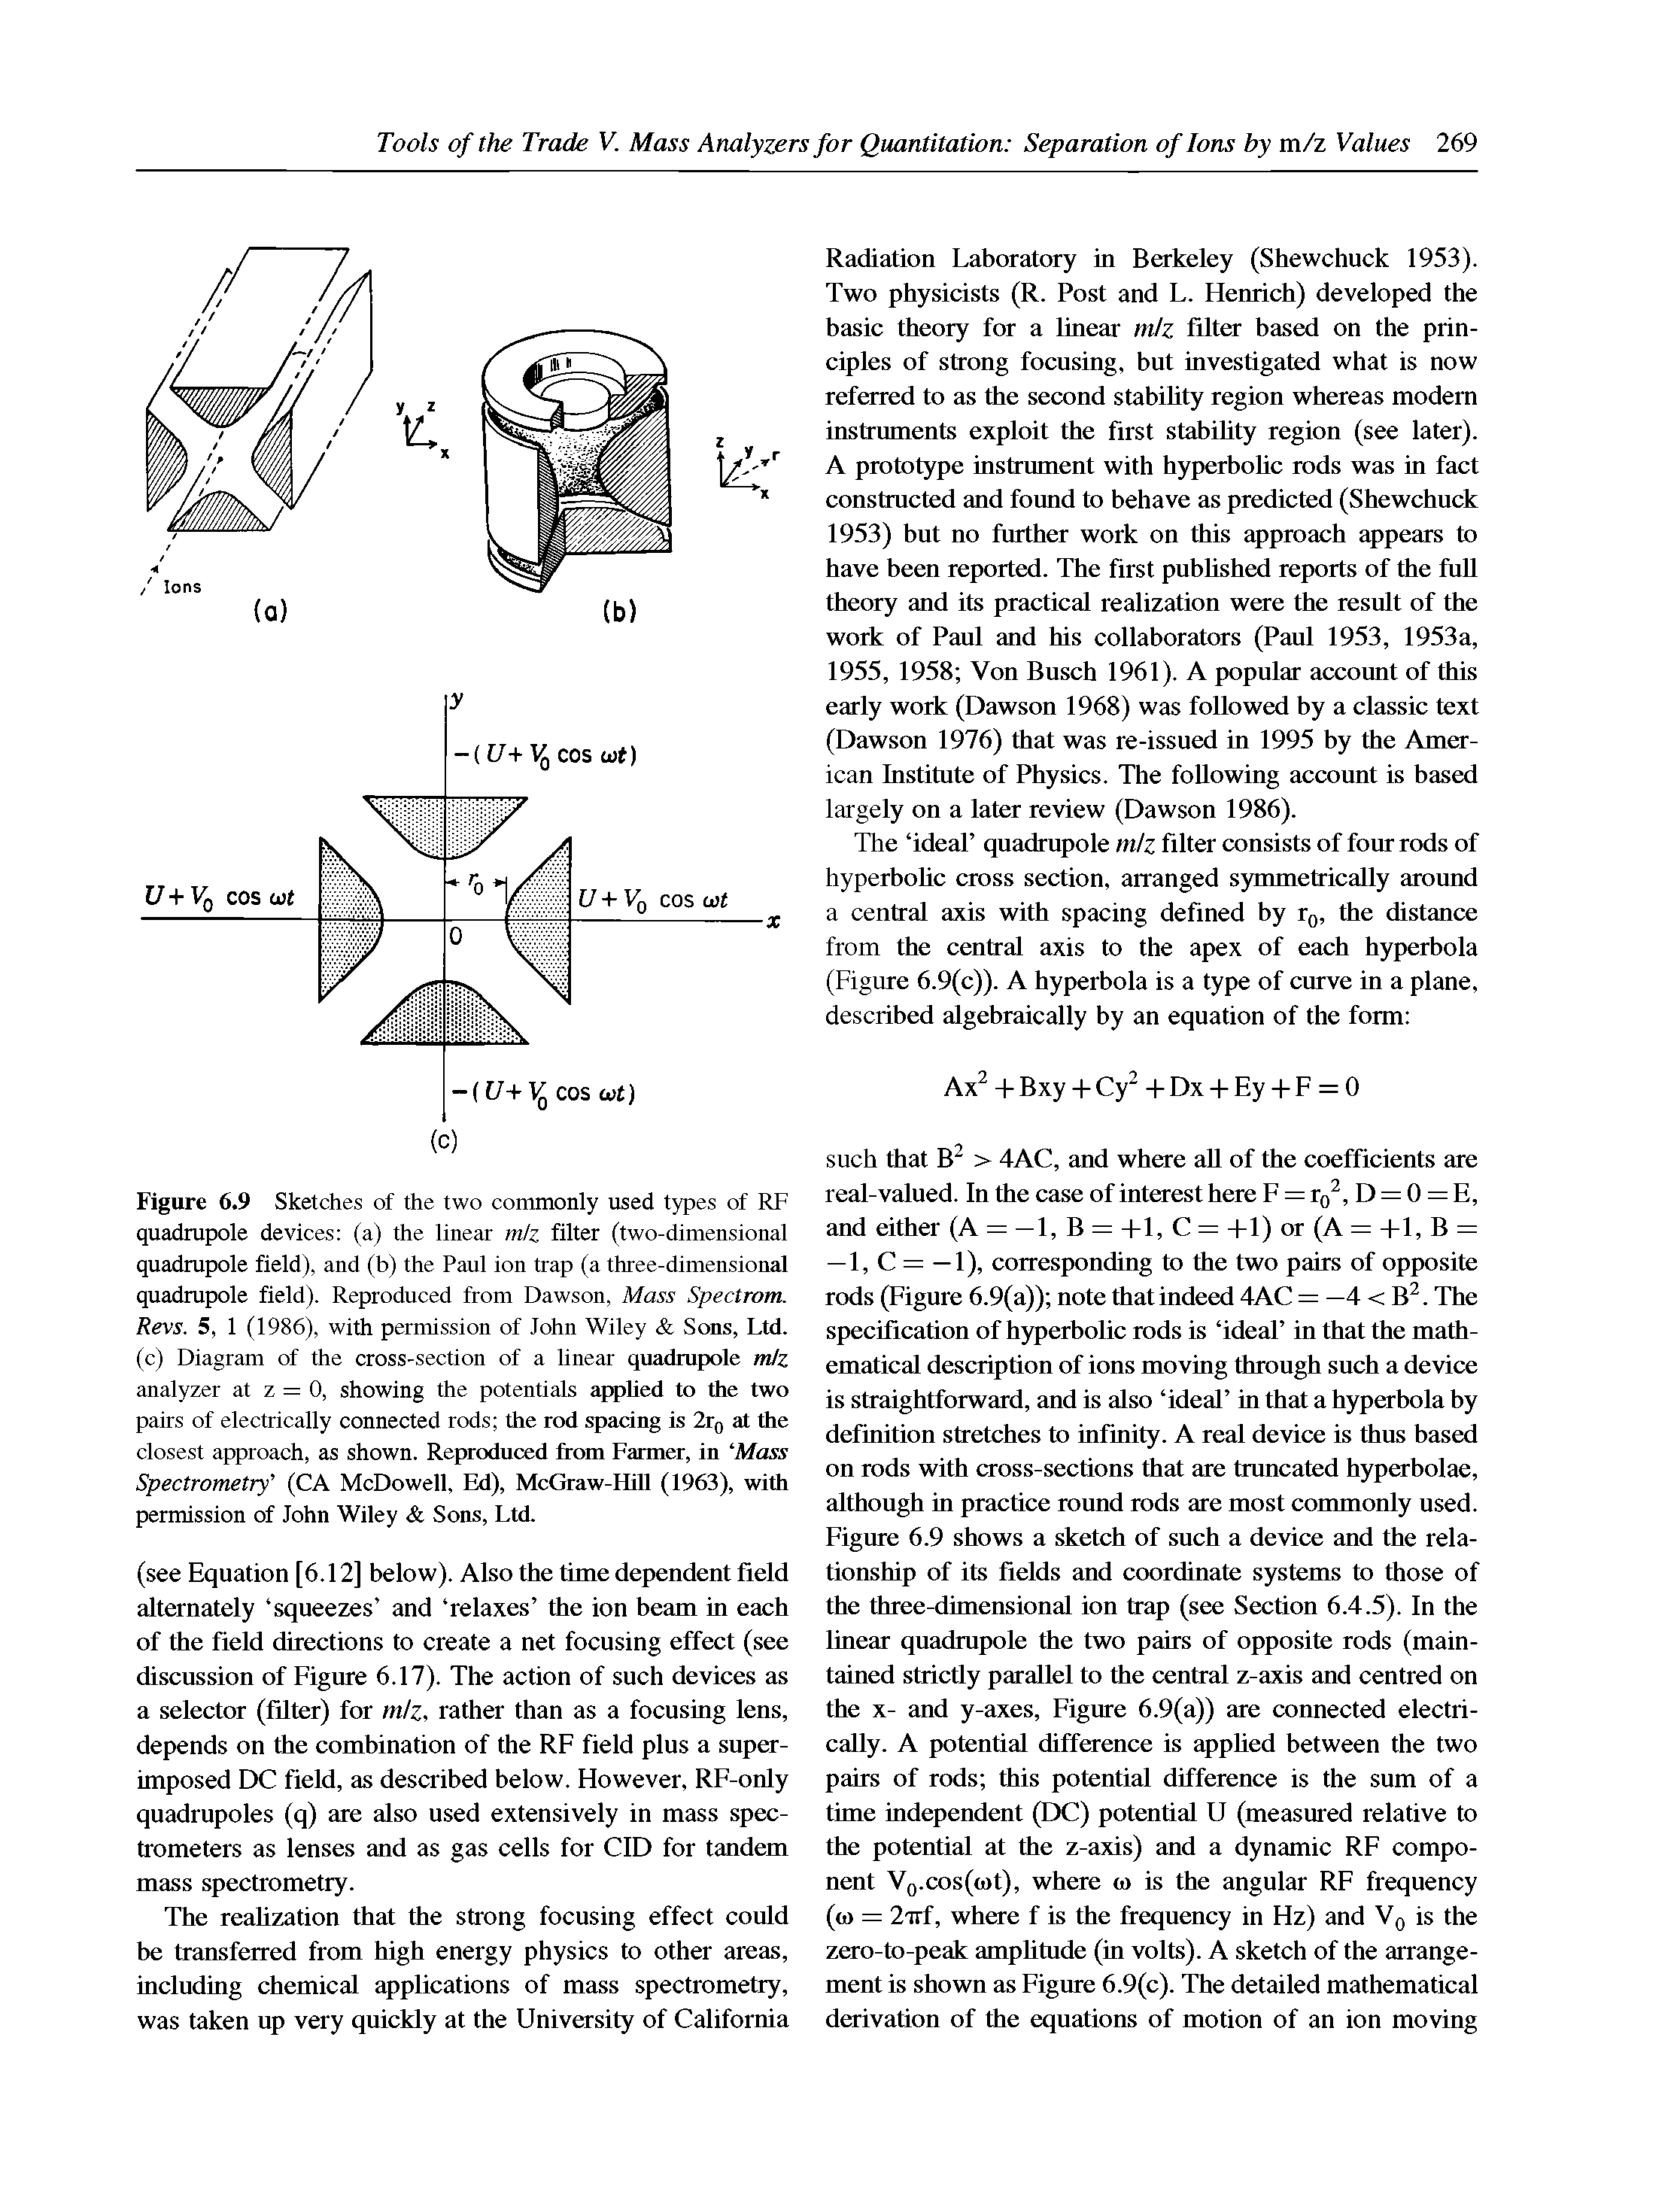 Figure 6.9 Sketches of the two commonly used types of RF quadrupole devices (a) the linear m/z filter (two-dimensional quadrupole field), and (b) the Paul ion trap (a three-dimensional quadrupole field). Reproduced from Dawson, Mass Spectrom. Revs. 5, 1 (1986), with permission of John Wiley Sons, Ltd. (c) Diagram of the cross-section of a linear quadrupole m/z analyzer at z = 0, showing the potentials applied to the two pairs of electrically connected rods the rod spacing is 2tq at the closest approach, as shown. Reproduced from Farmer, in Mass Spectrometry (CA McDowell, Ed), McGraw-Hill (1963), with permission of John Wiley Sons, Ltd.